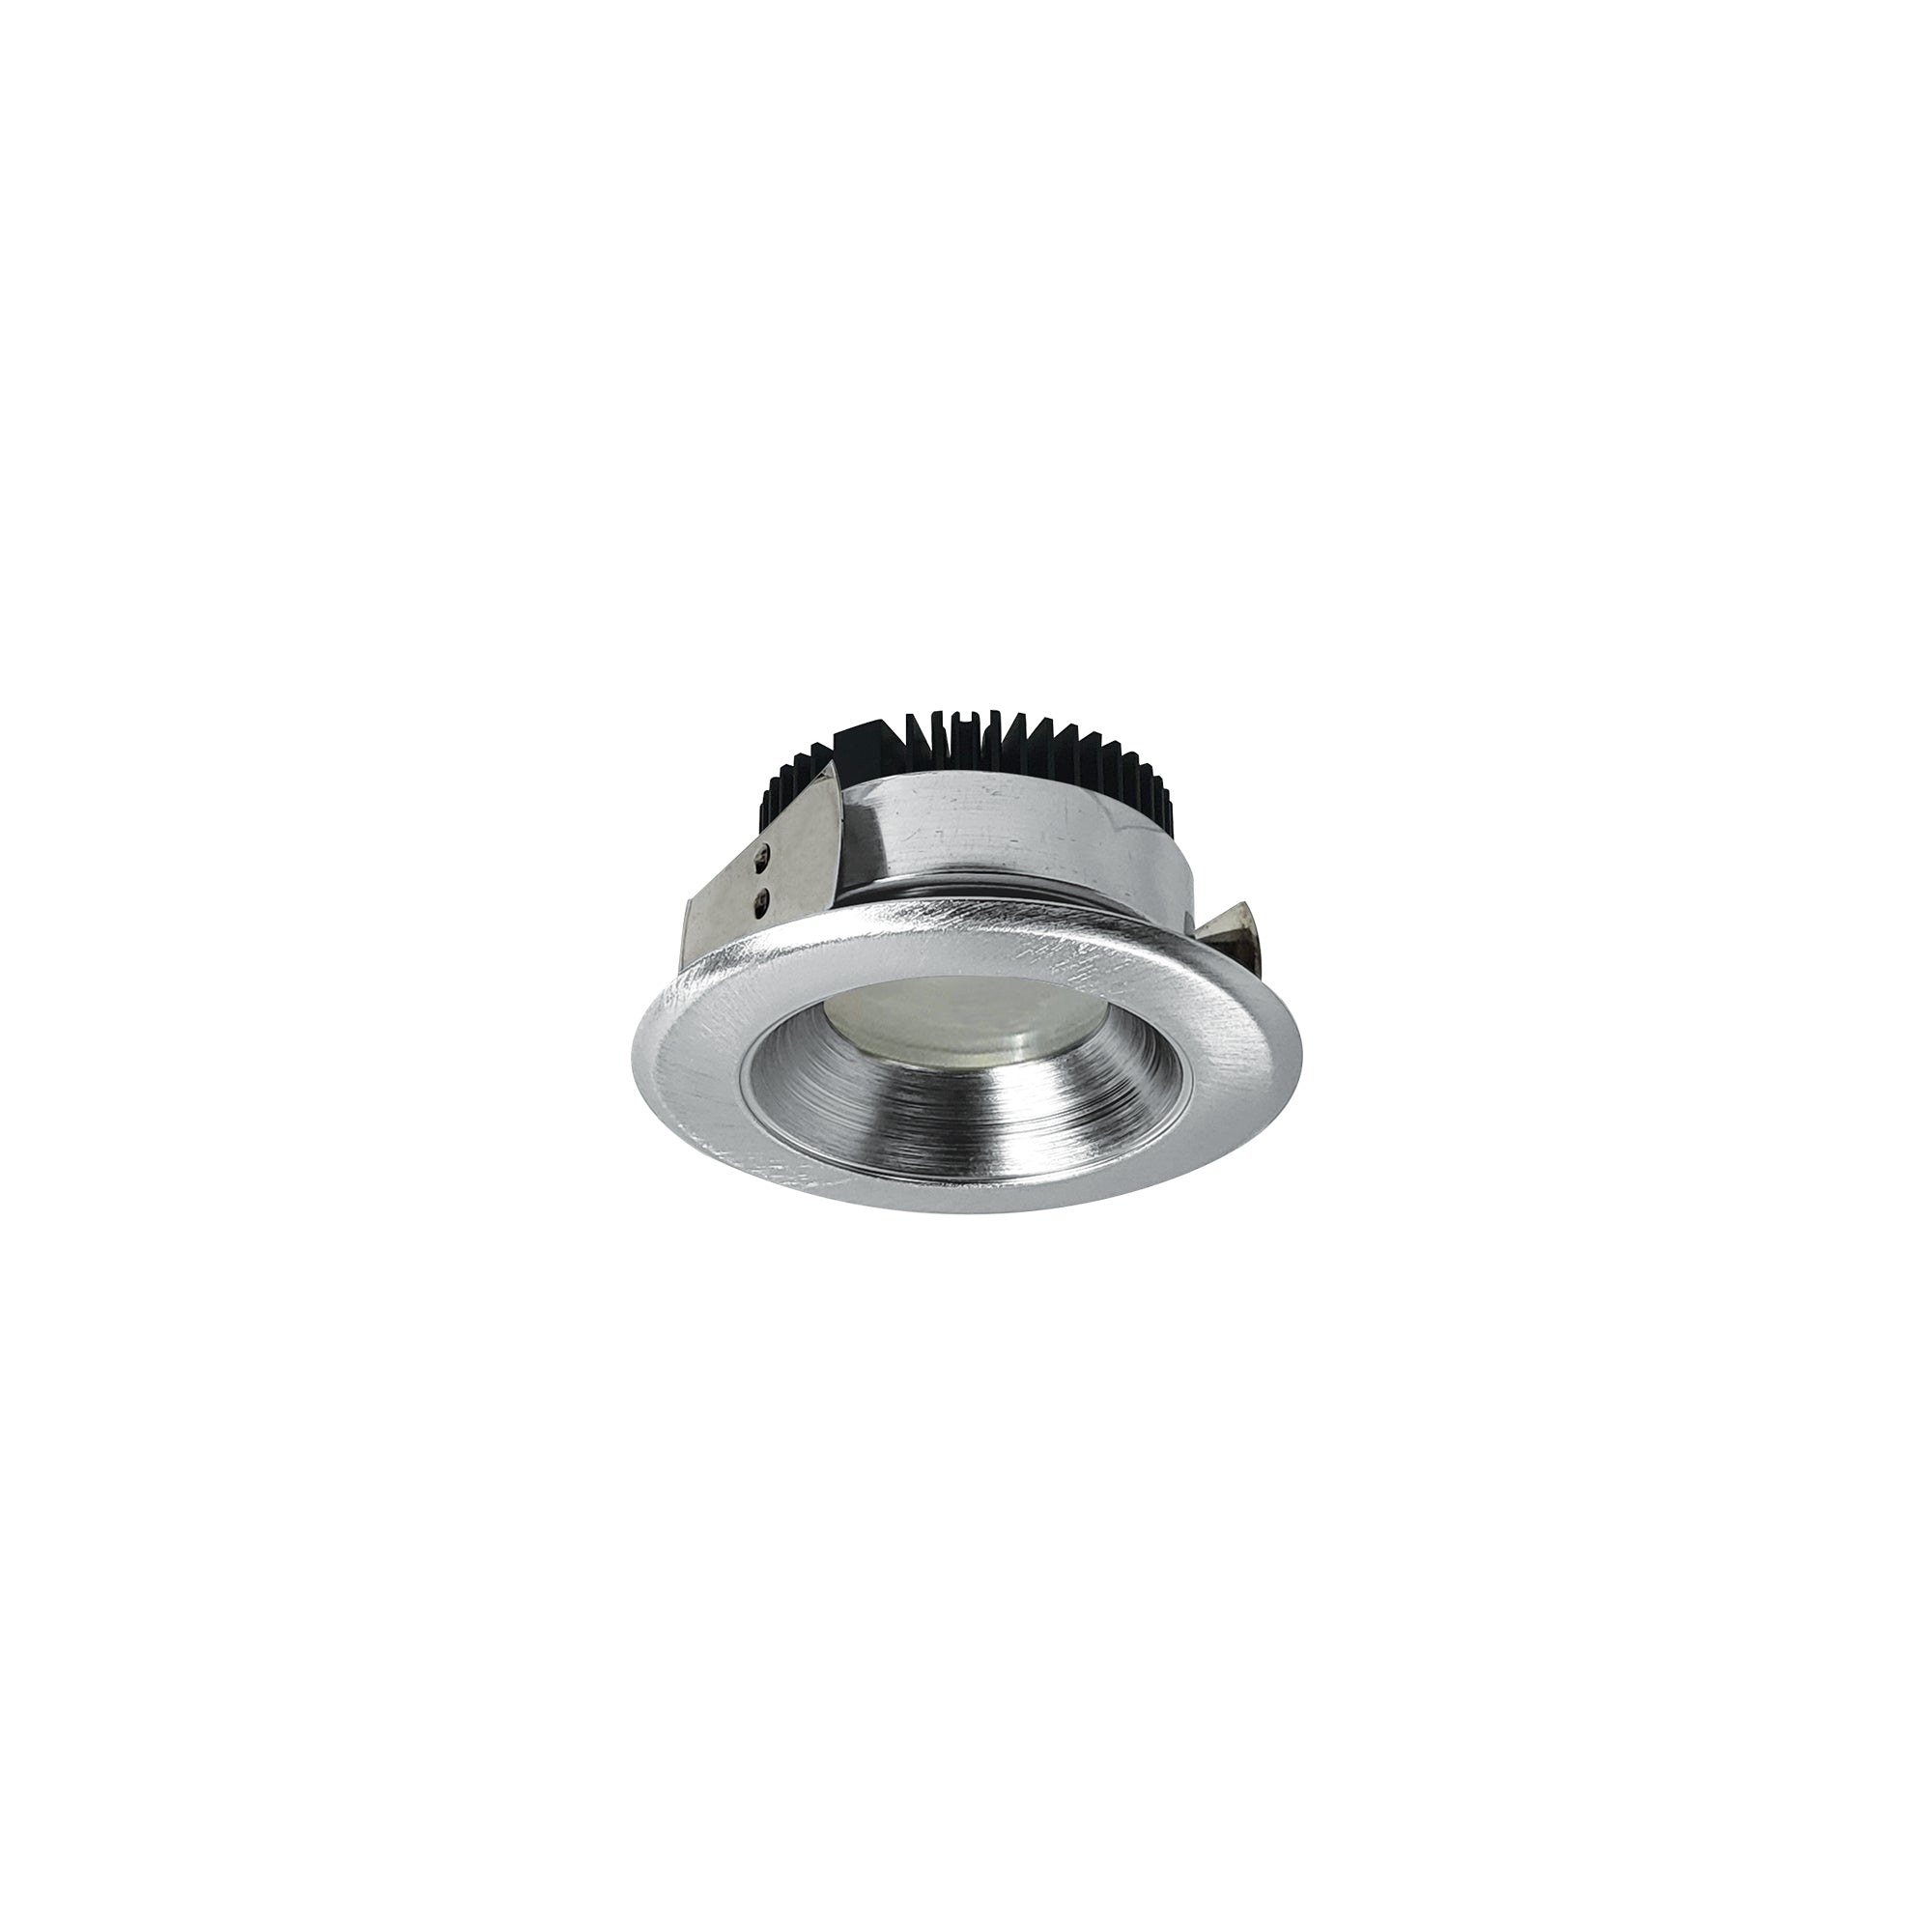 Nora Lighting NRM2-411L0940FNN - Recessed - 4 Inch Marquise II Round Reflector, 900lm, 4000K, Flood, Natural Metal